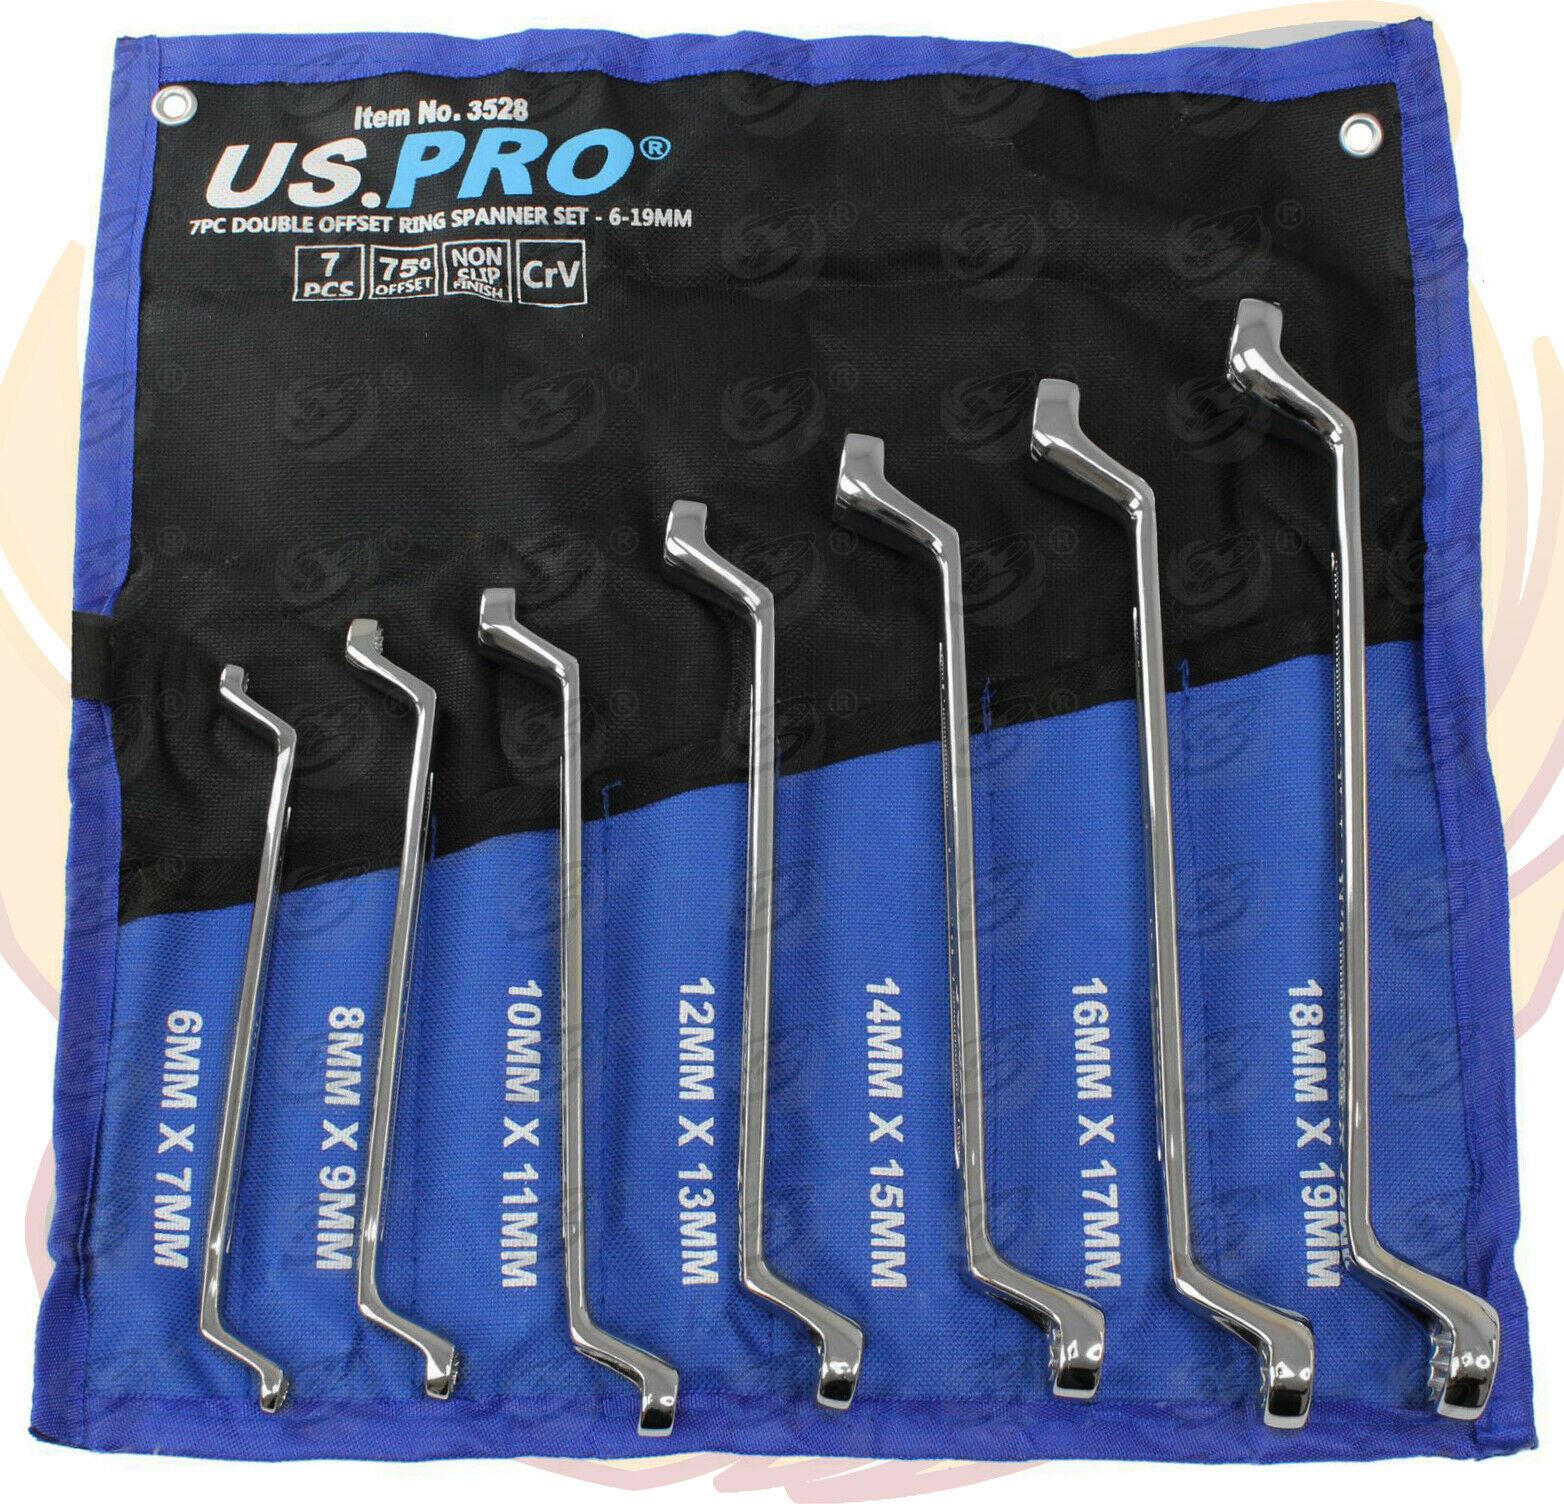 US PRO 7PCS OFFSET DOUBLE RING 12 POINT SPANNER 6MM - 19MM